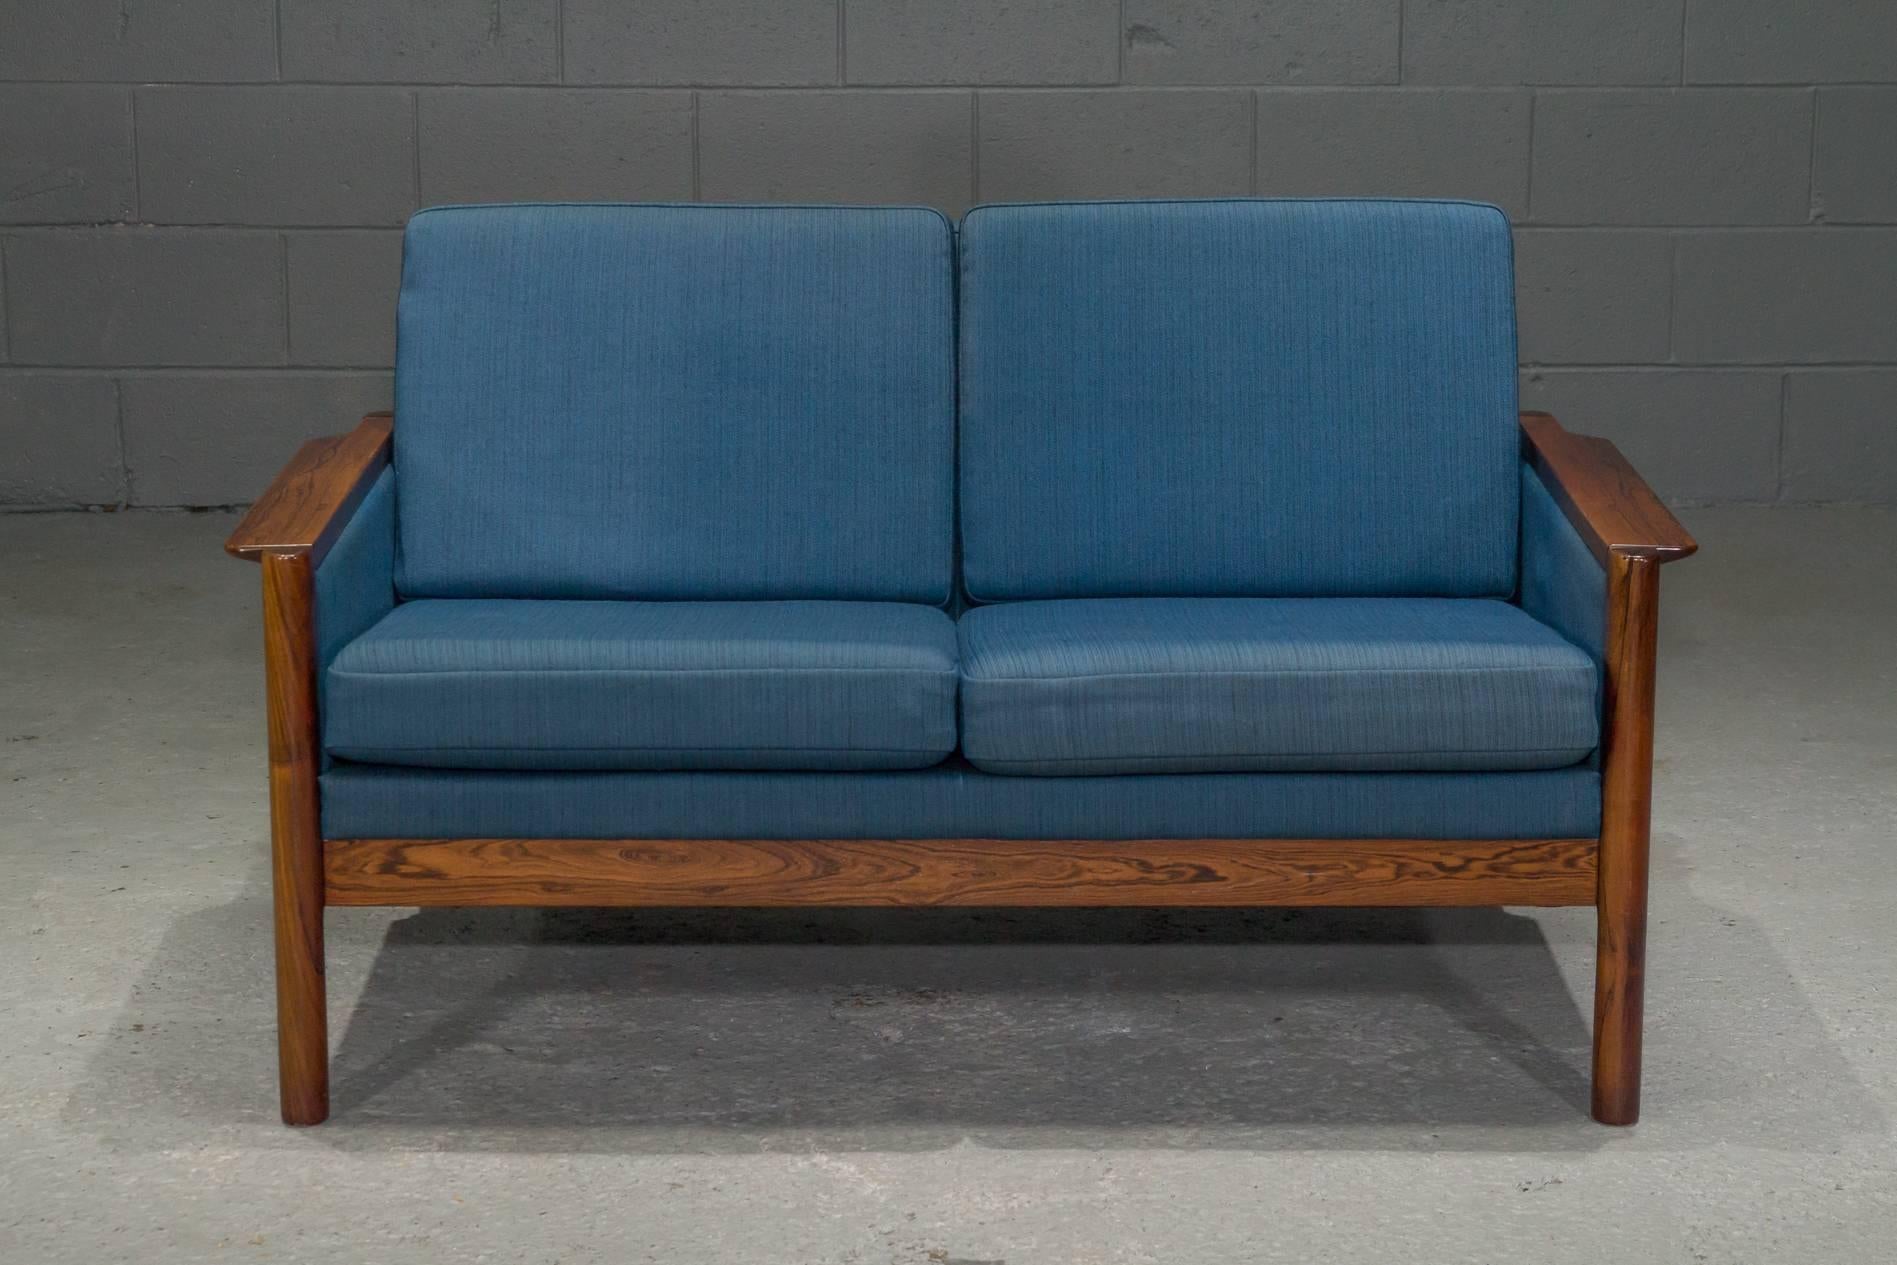 Danish Rosewood Settee with Blue Textile. Solid rosewood frame. Matching armchair and sofa also available.